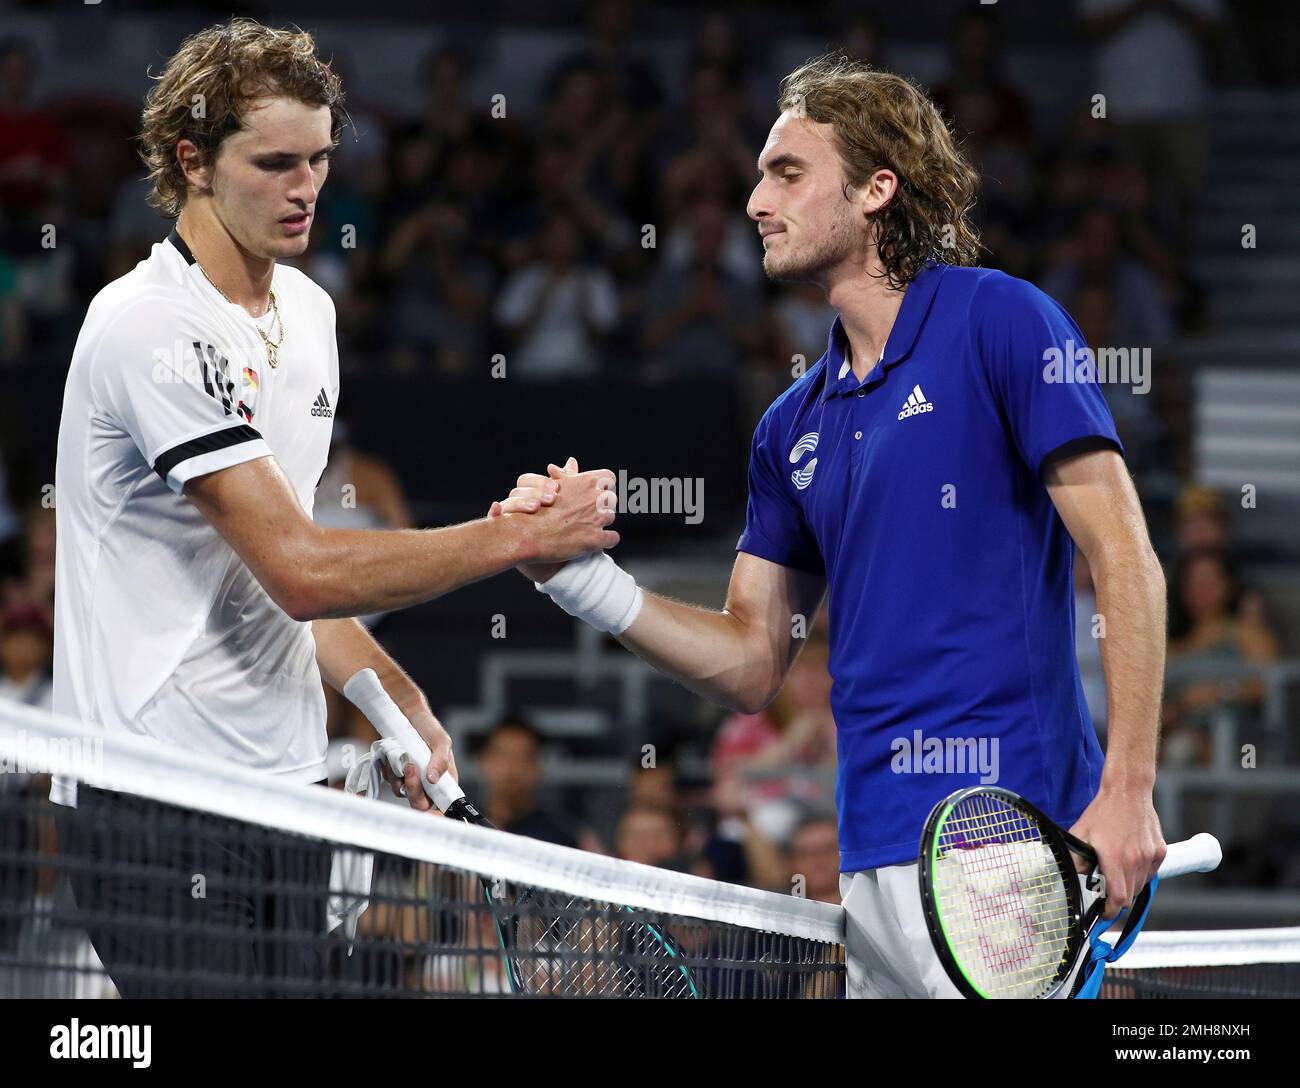 Stefanos Tsitsipas of Greece, right, shakes hands with Alexander Zverev of Germany, left, after winning their match, at the ATP Cup tennis tournament in Brisbane, Australia, Sunday, Jan